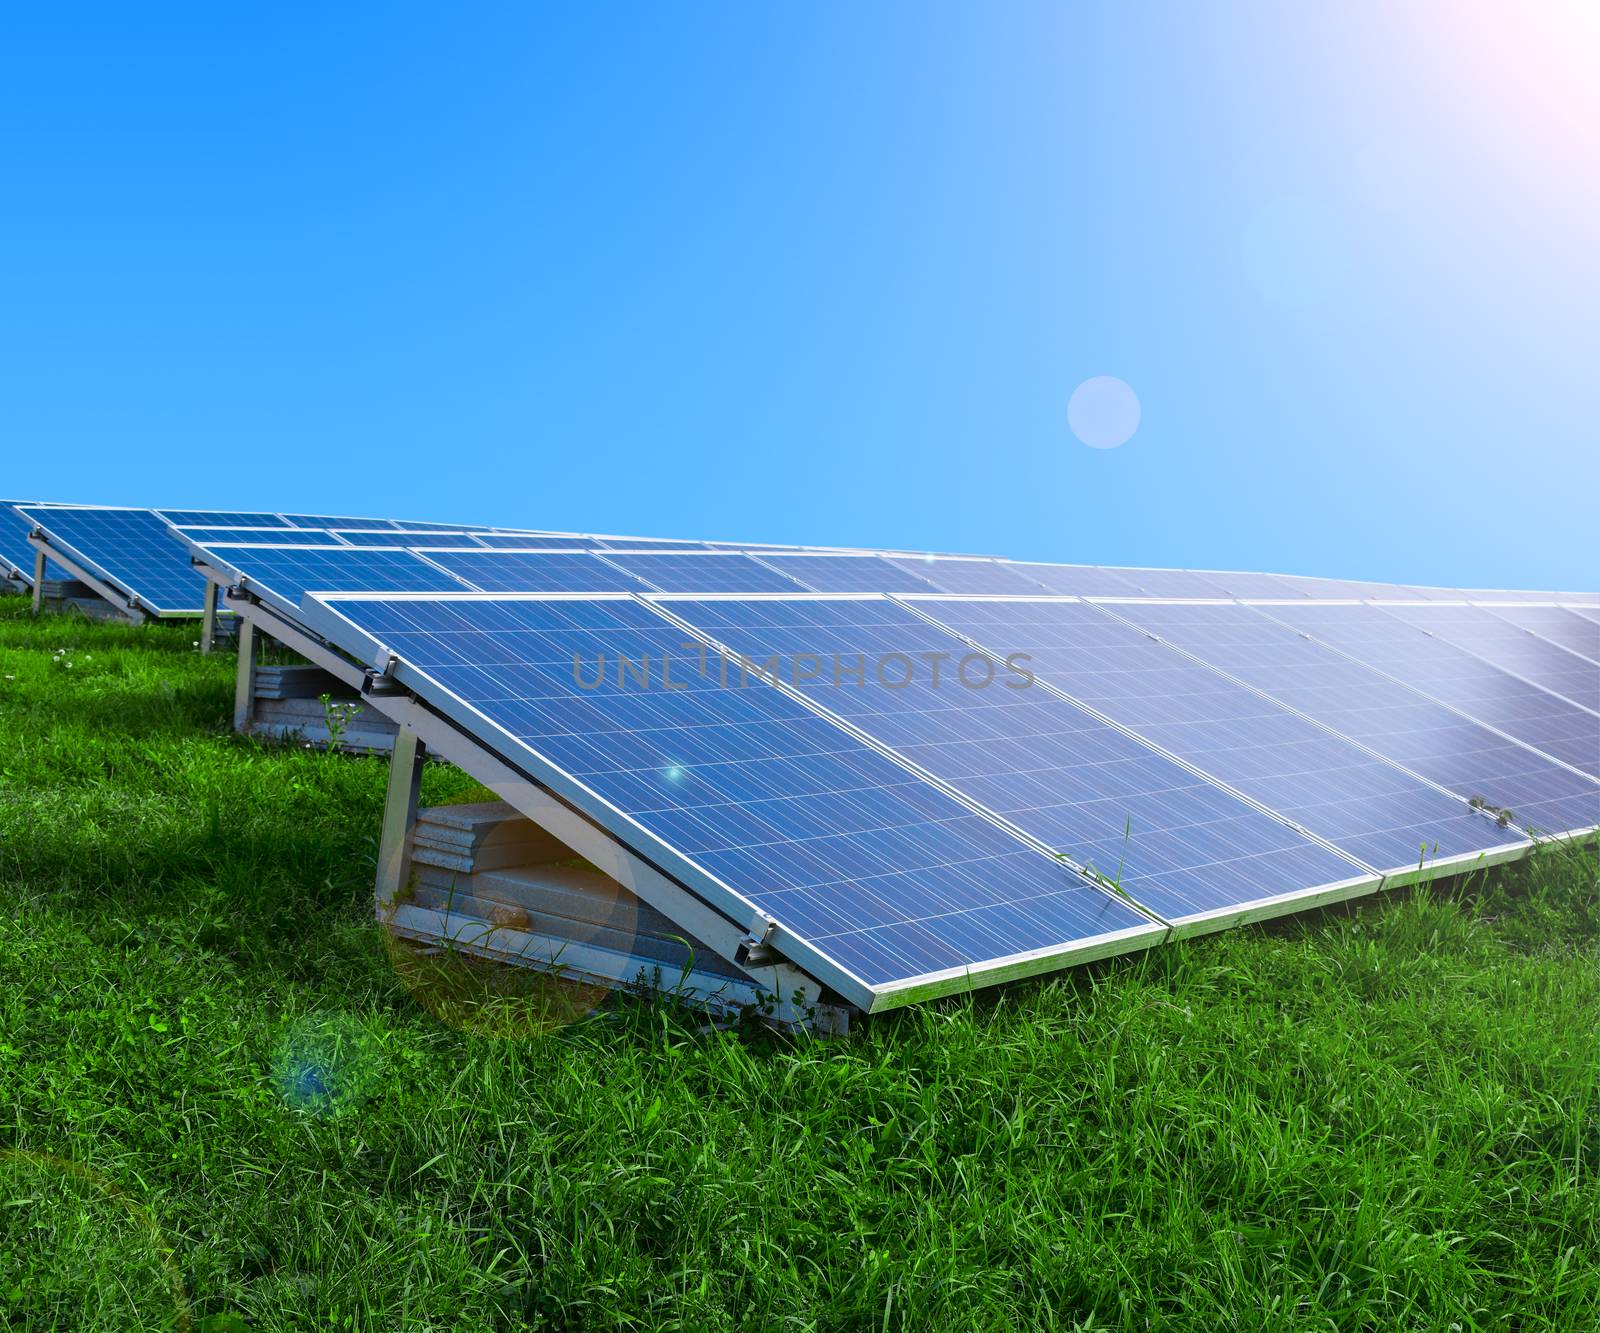 Solar panels on green grass. Blue sky in the background, with sunshine.